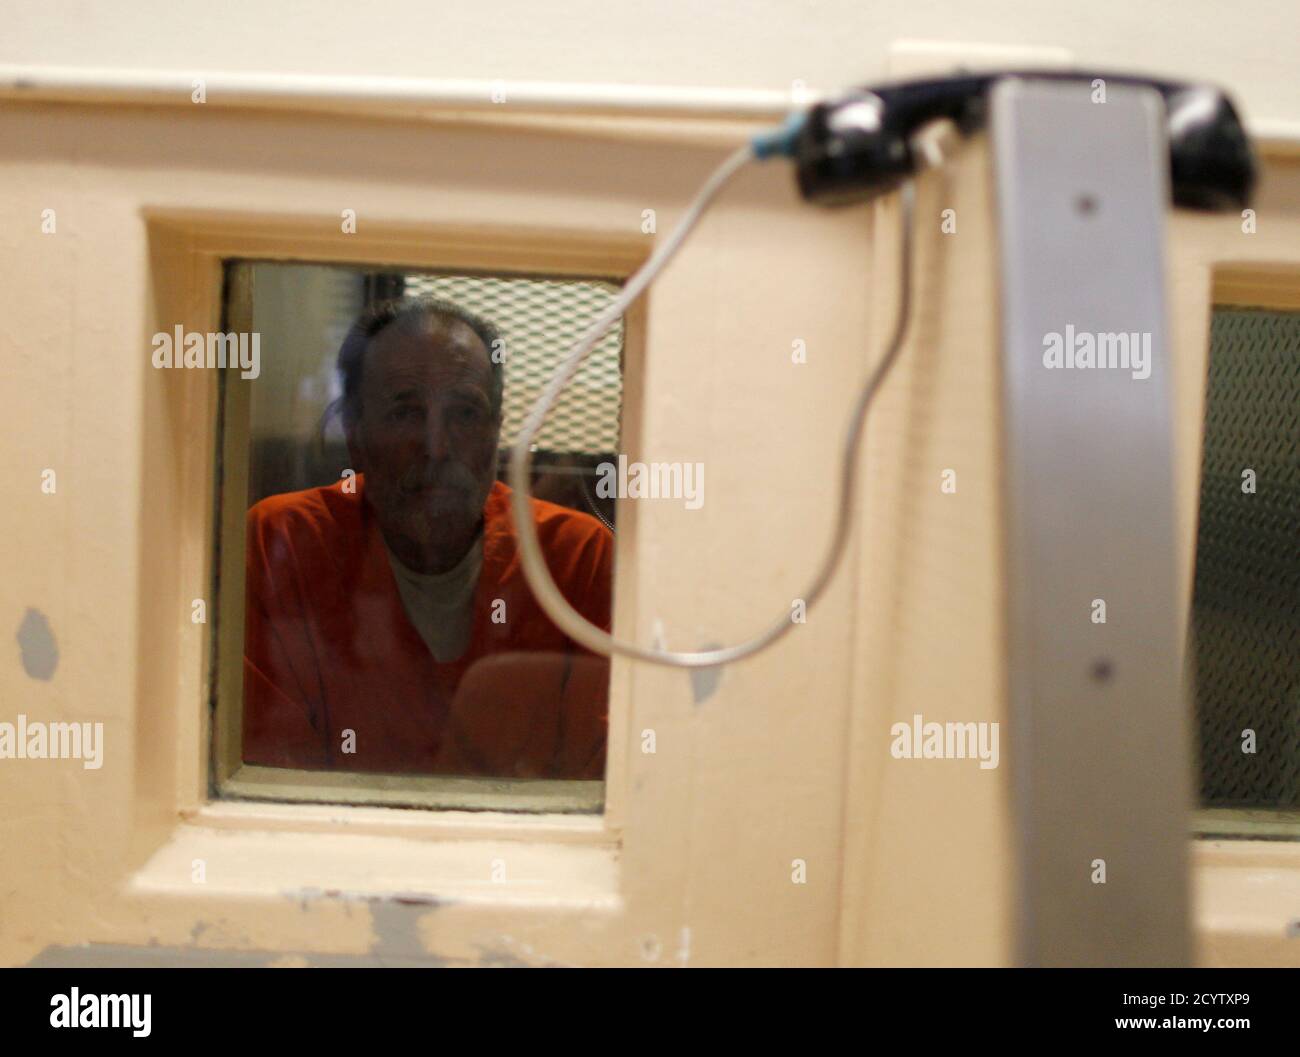 An inmate waits for a visitor at the California Institution for Men state prison in Chino, California, June 3, 2011. The Supreme Court has ordered California to release more than 30,000 inmates over the next two years or take other steps to ease overcrowding in its prisons to prevent "needless suffering and death." California's 33 adult prisons were designed to hold about 80,000 inmates and now have about 145,000. The United States has more than 2 million people in state and local prisons. It has long had the highest incarceration rate in the world. REUTERS/Lucy Nicholson (UNITED STATES - Tags Stock Photo